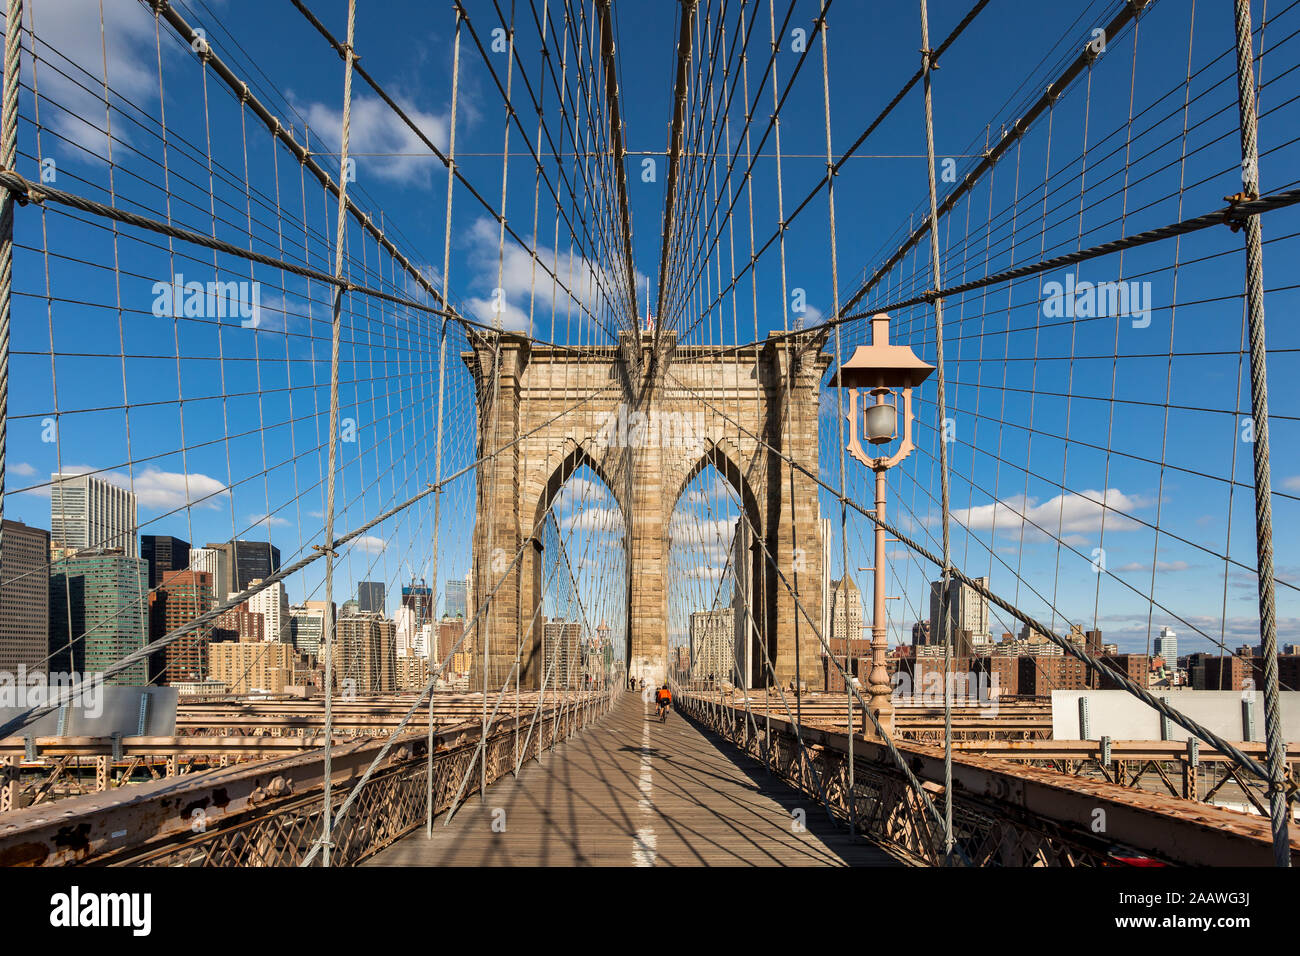 Diminishing perspective of Brooklyn Bridge against blue sky in New York City, USA Stock Photo